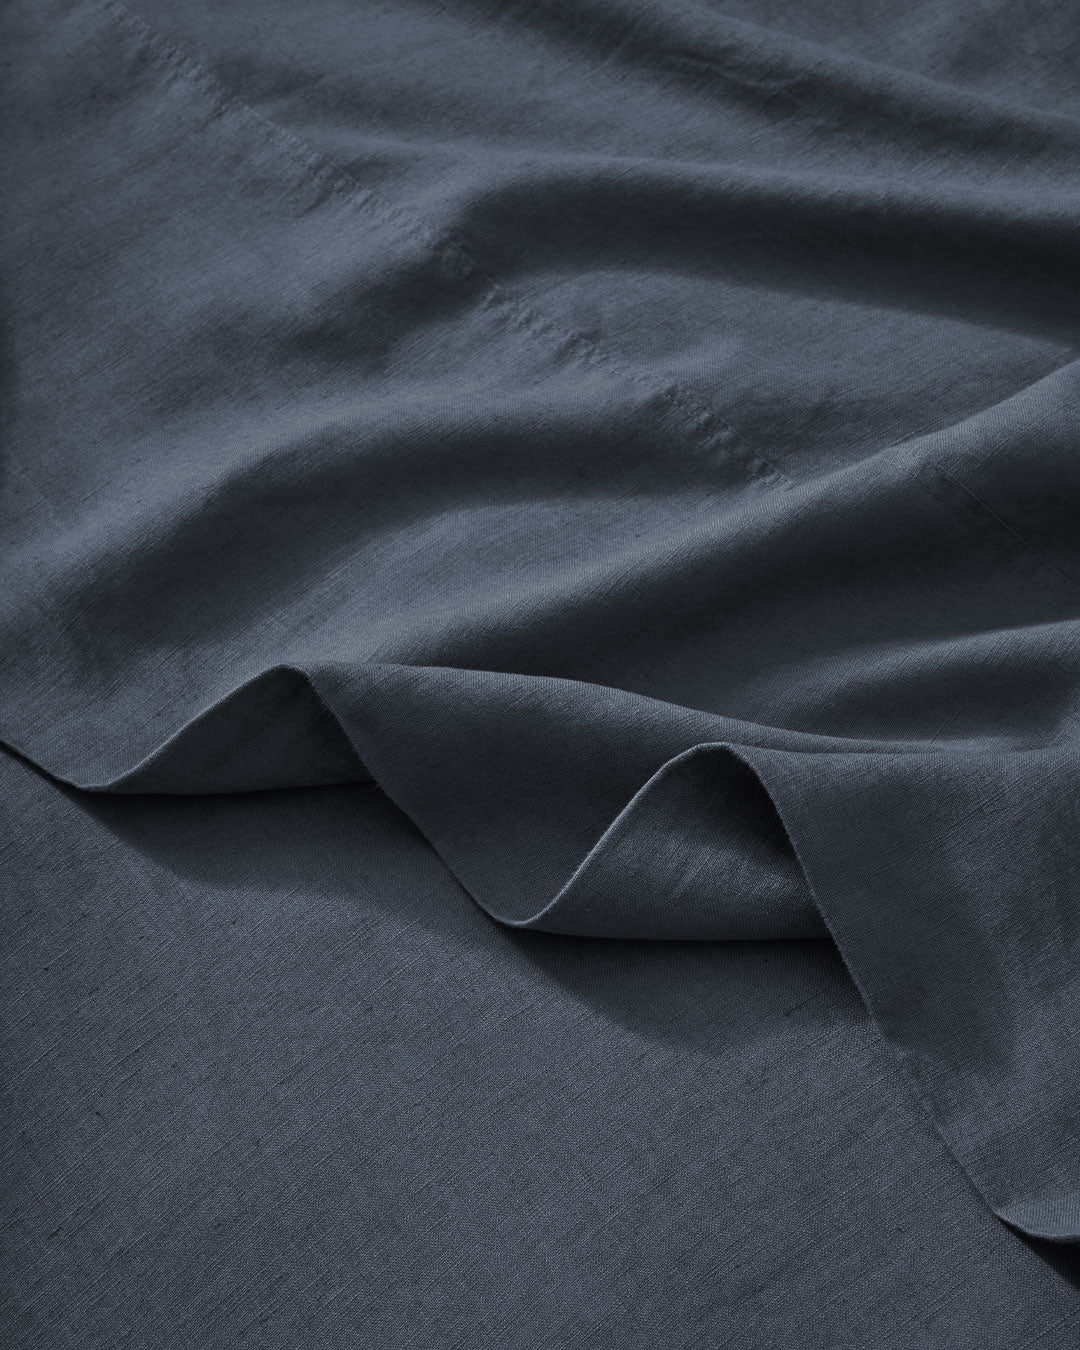 Crafted from the highest quality French Flax Linen. The Denim colourway is a soft denim blue that will bring a sense of calm to your bedroom and sit beautifully in any cool, neutral or coastal setting.